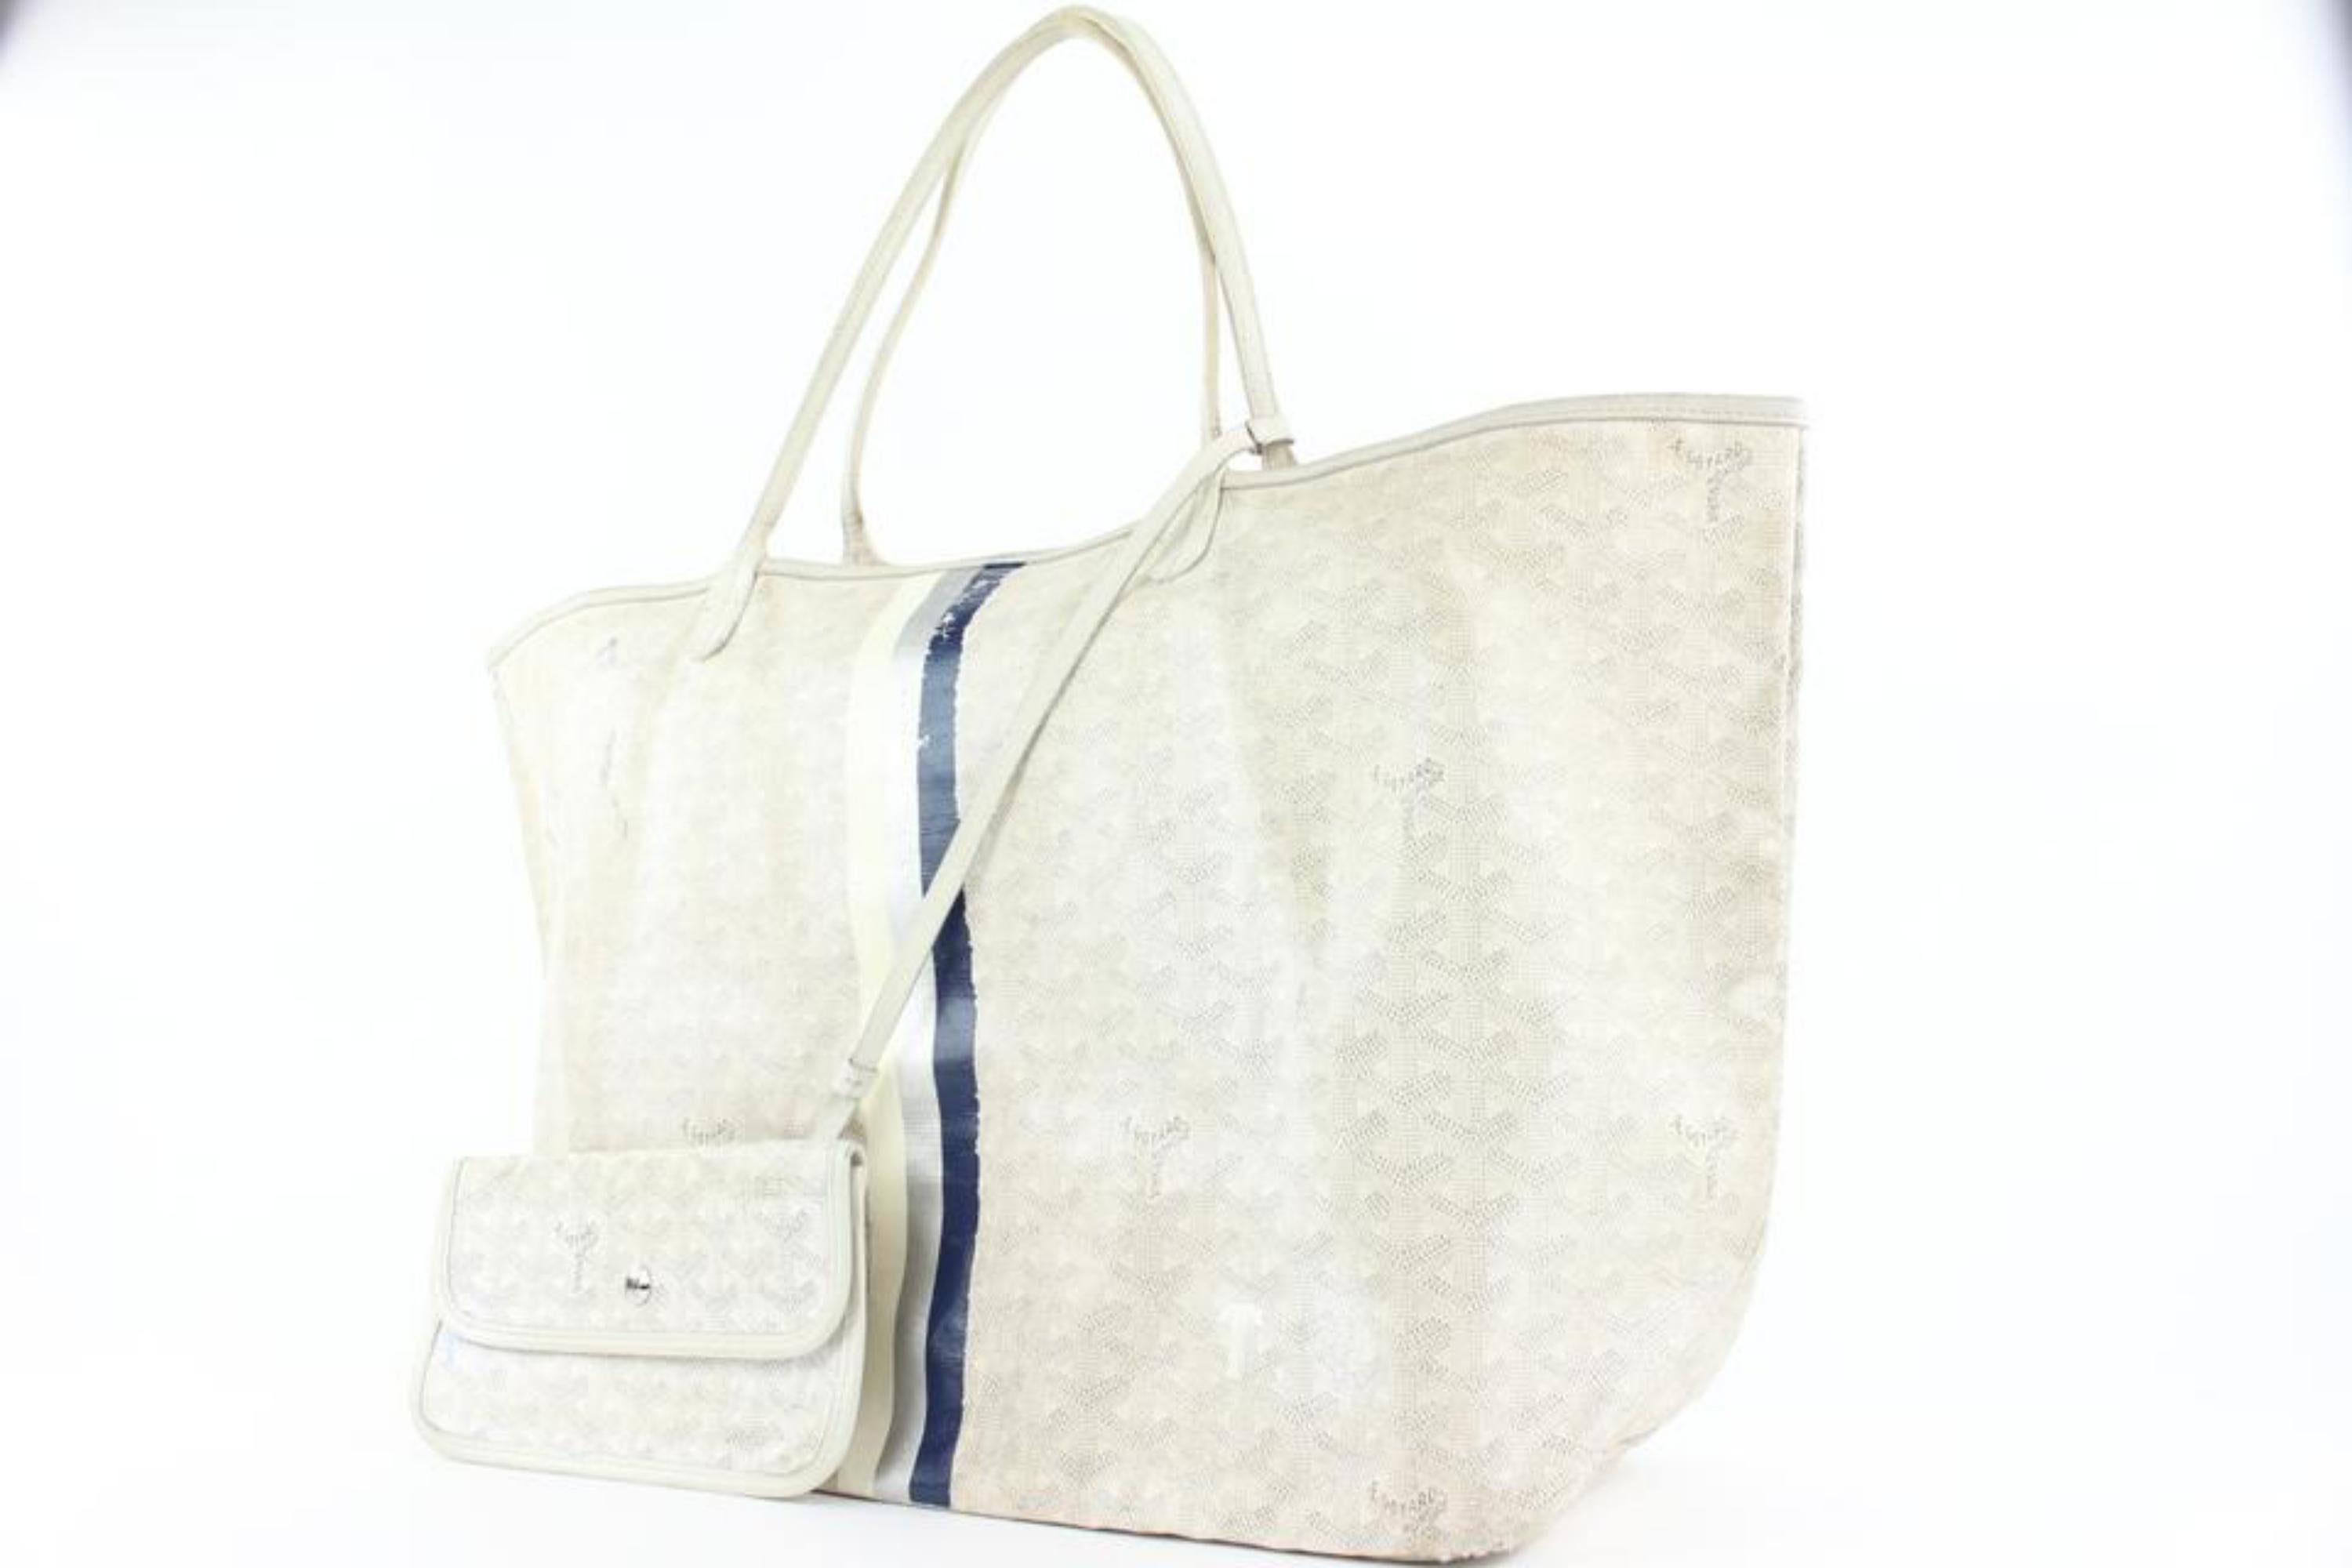 Goyard Large White Chevron St Louis GM Tote Bag w Pouch Upcycle Ready 2G411Y
Date Code/Serial Number: SUT020156
Made In: France
Measurements: Length:  21.5